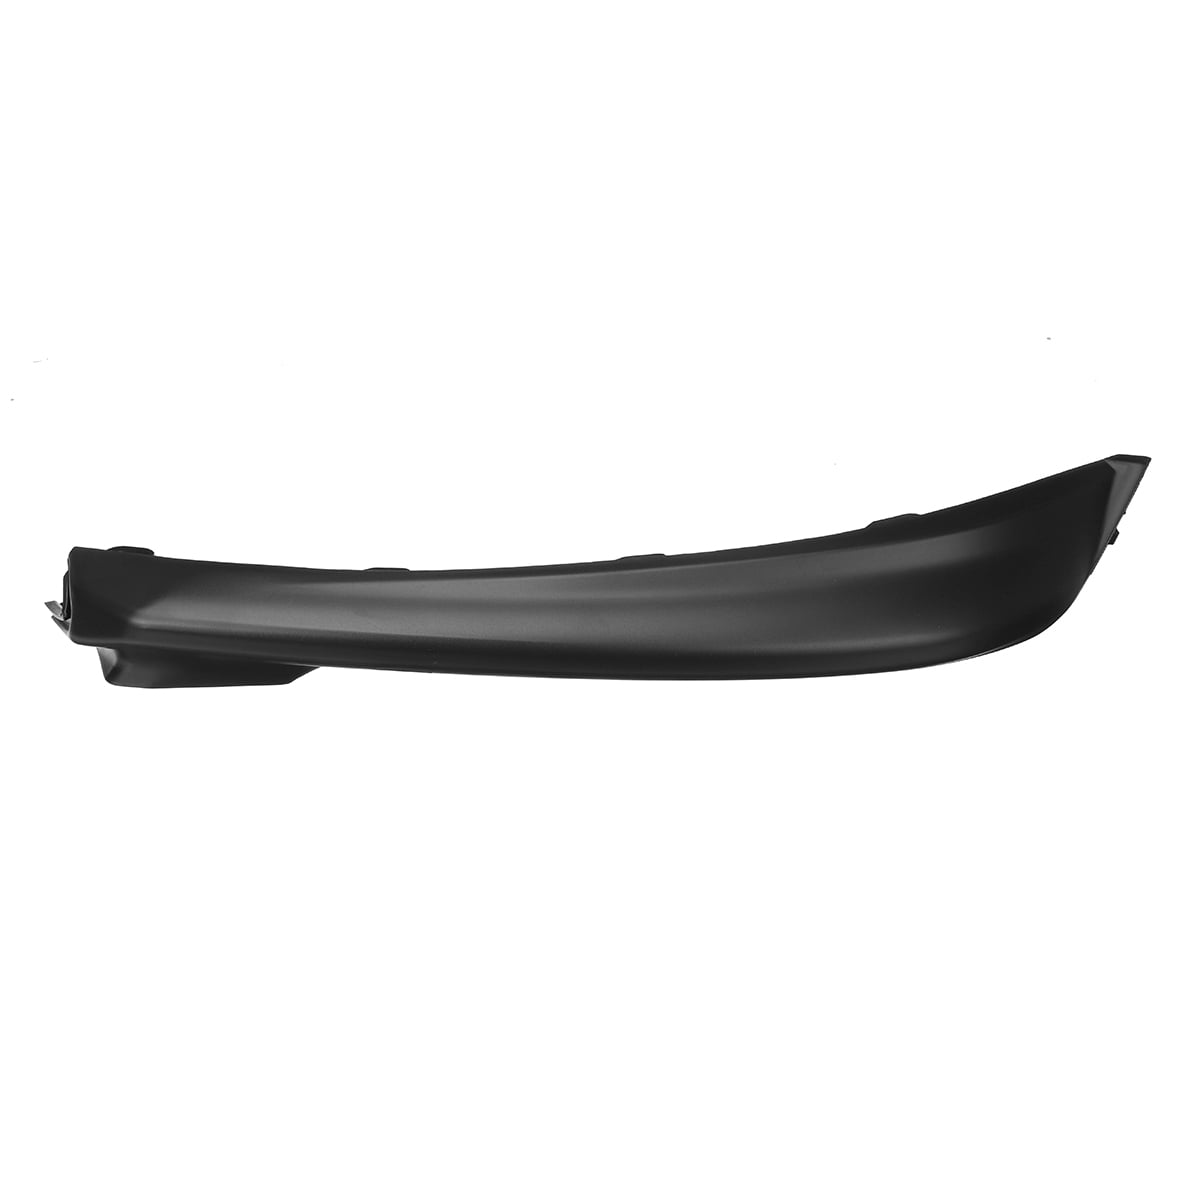 Front Bumper Molding For CAMRY 18-18 Fits TO1044119 RT01590002 5312233040 